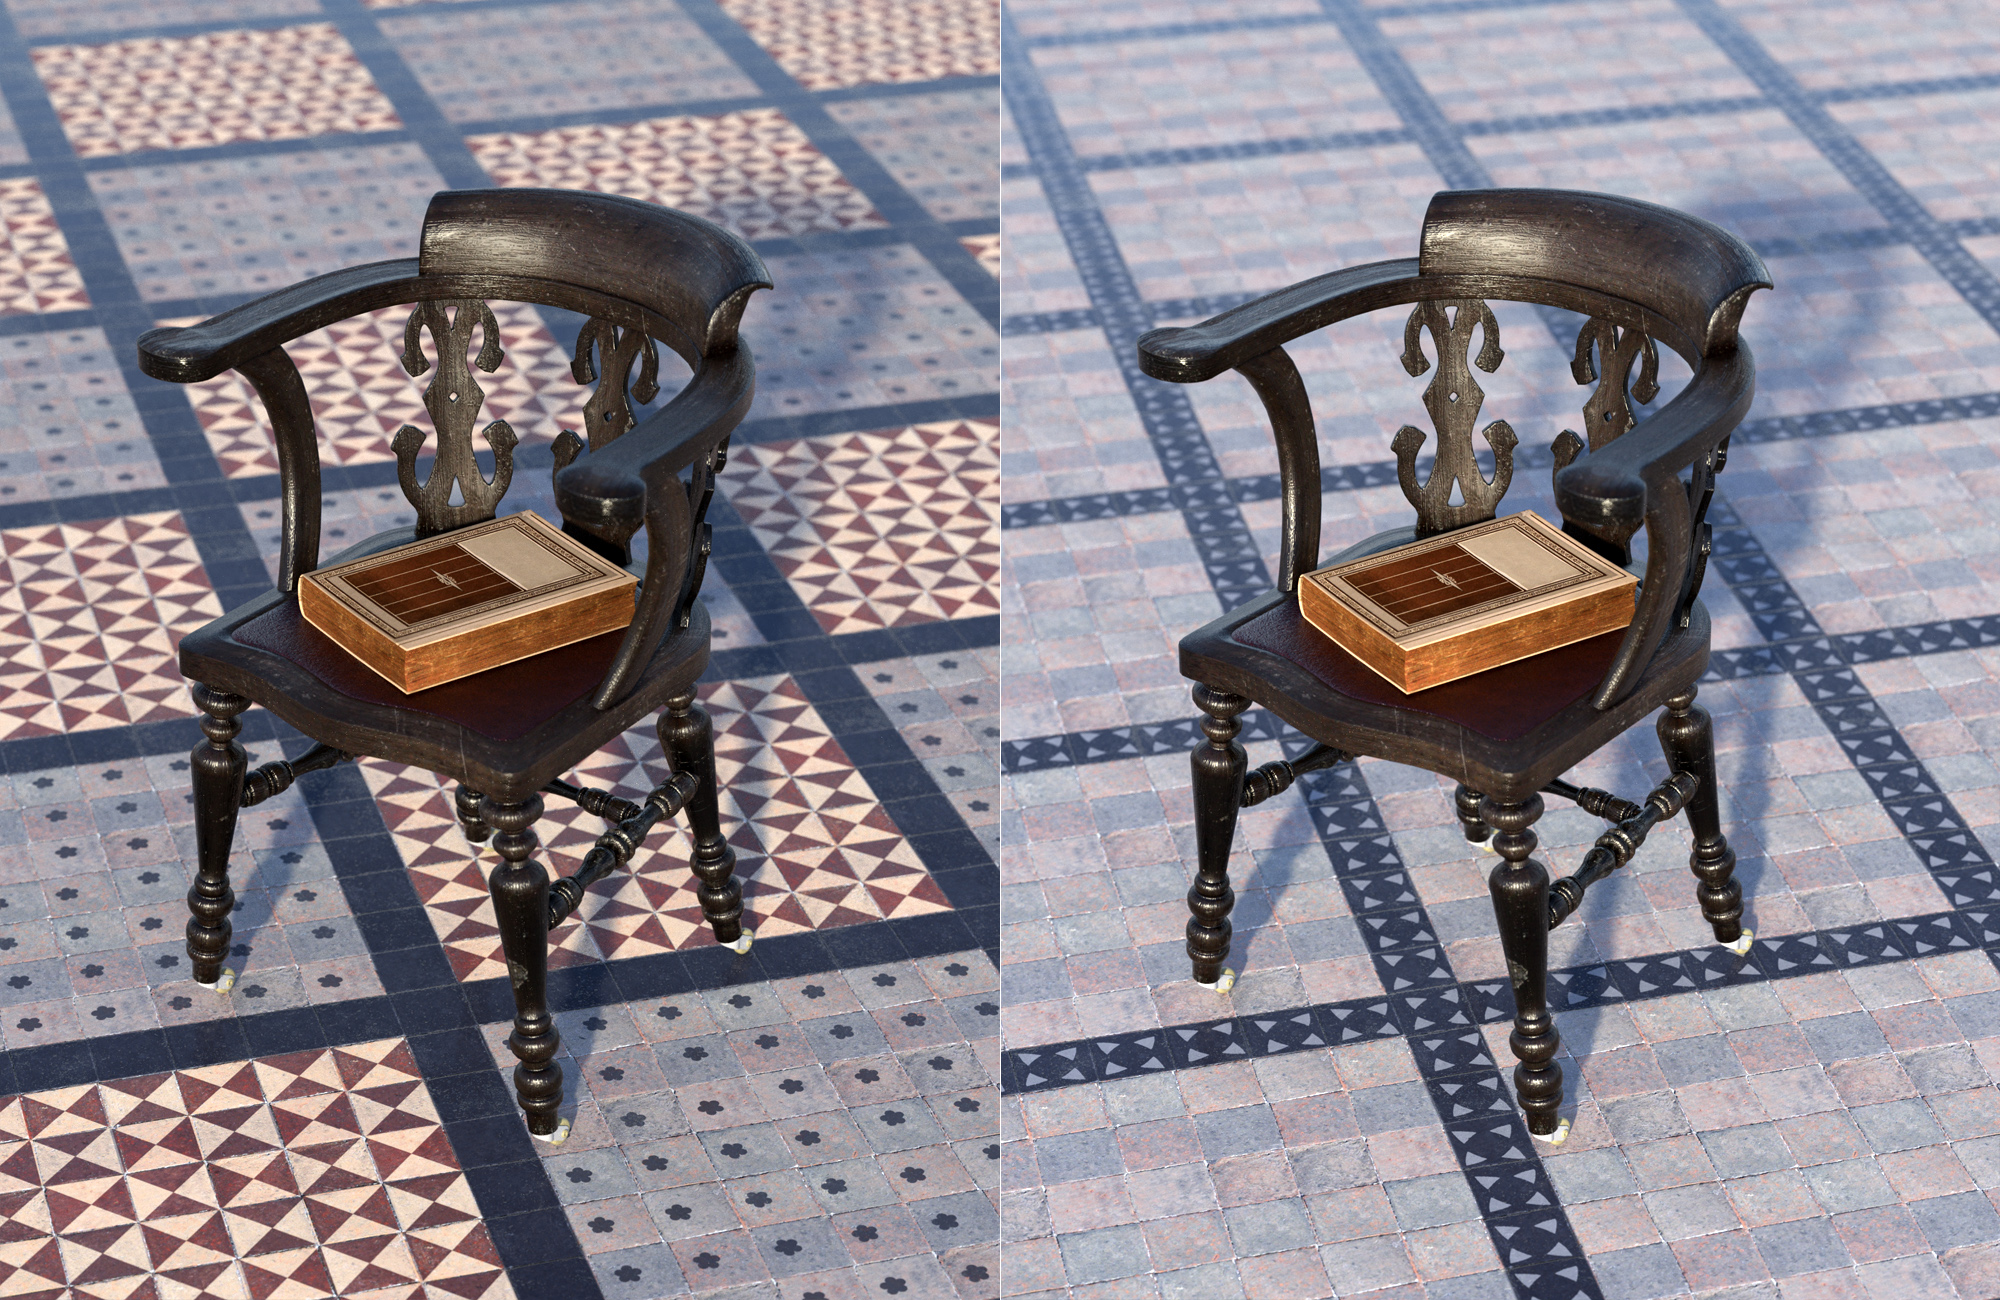 Medieval Church Floor Tile Iray Shaders Vol 3 by: ForbiddenWhispers, 3D Models by Daz 3D